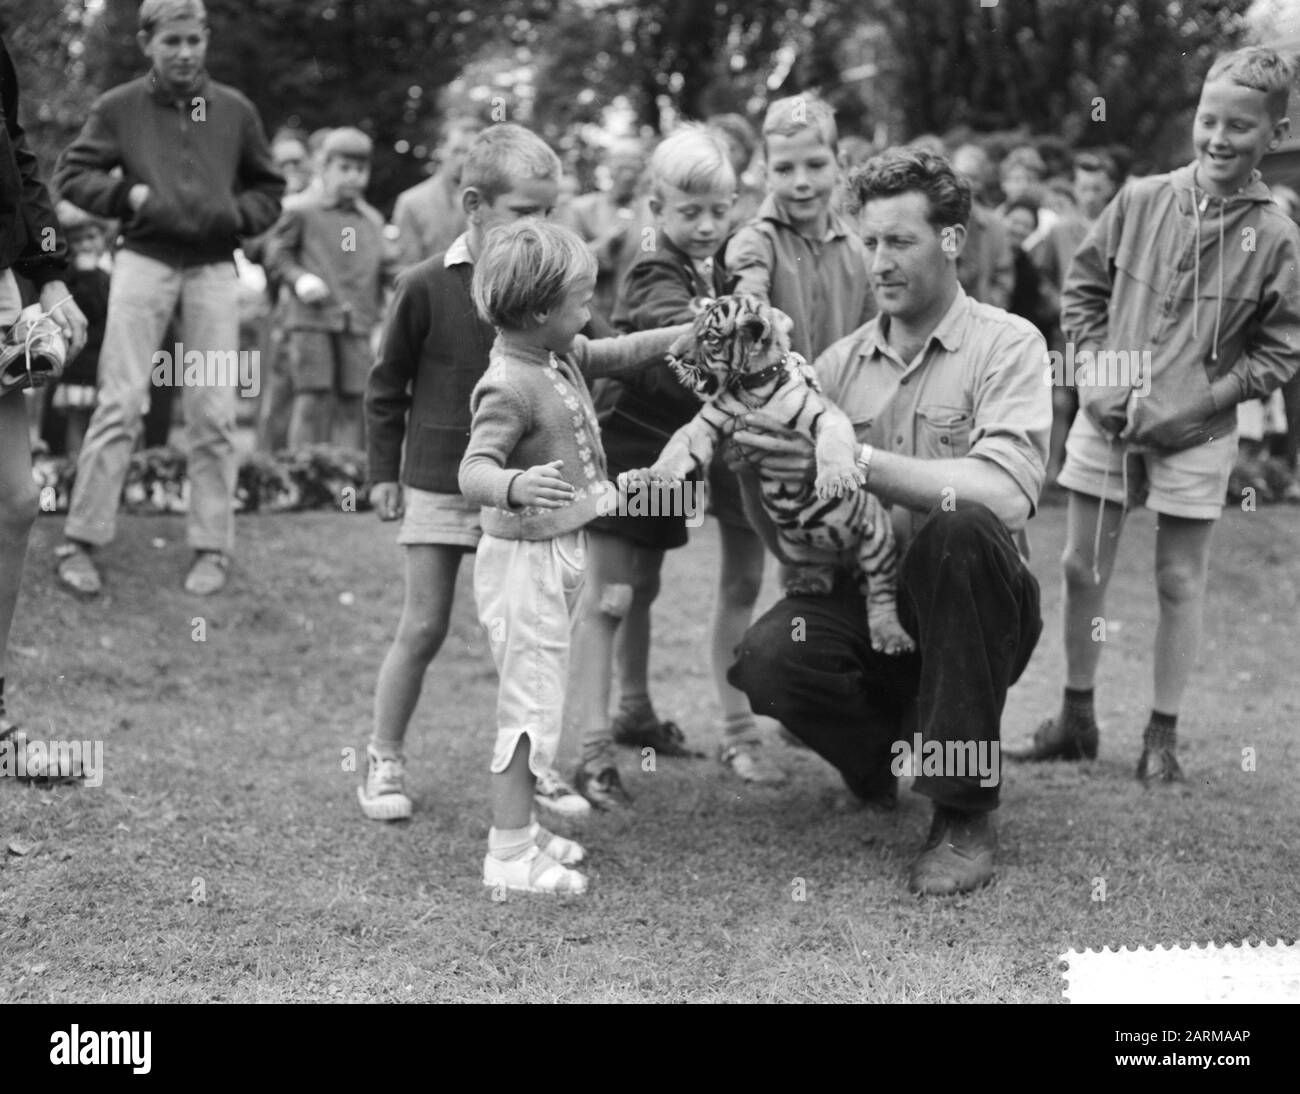 Wittaartgnoe born in Artis, nanny Nijdam with young Bengali tiger Date:  August 3, 1959 Stock Photo - Alamy